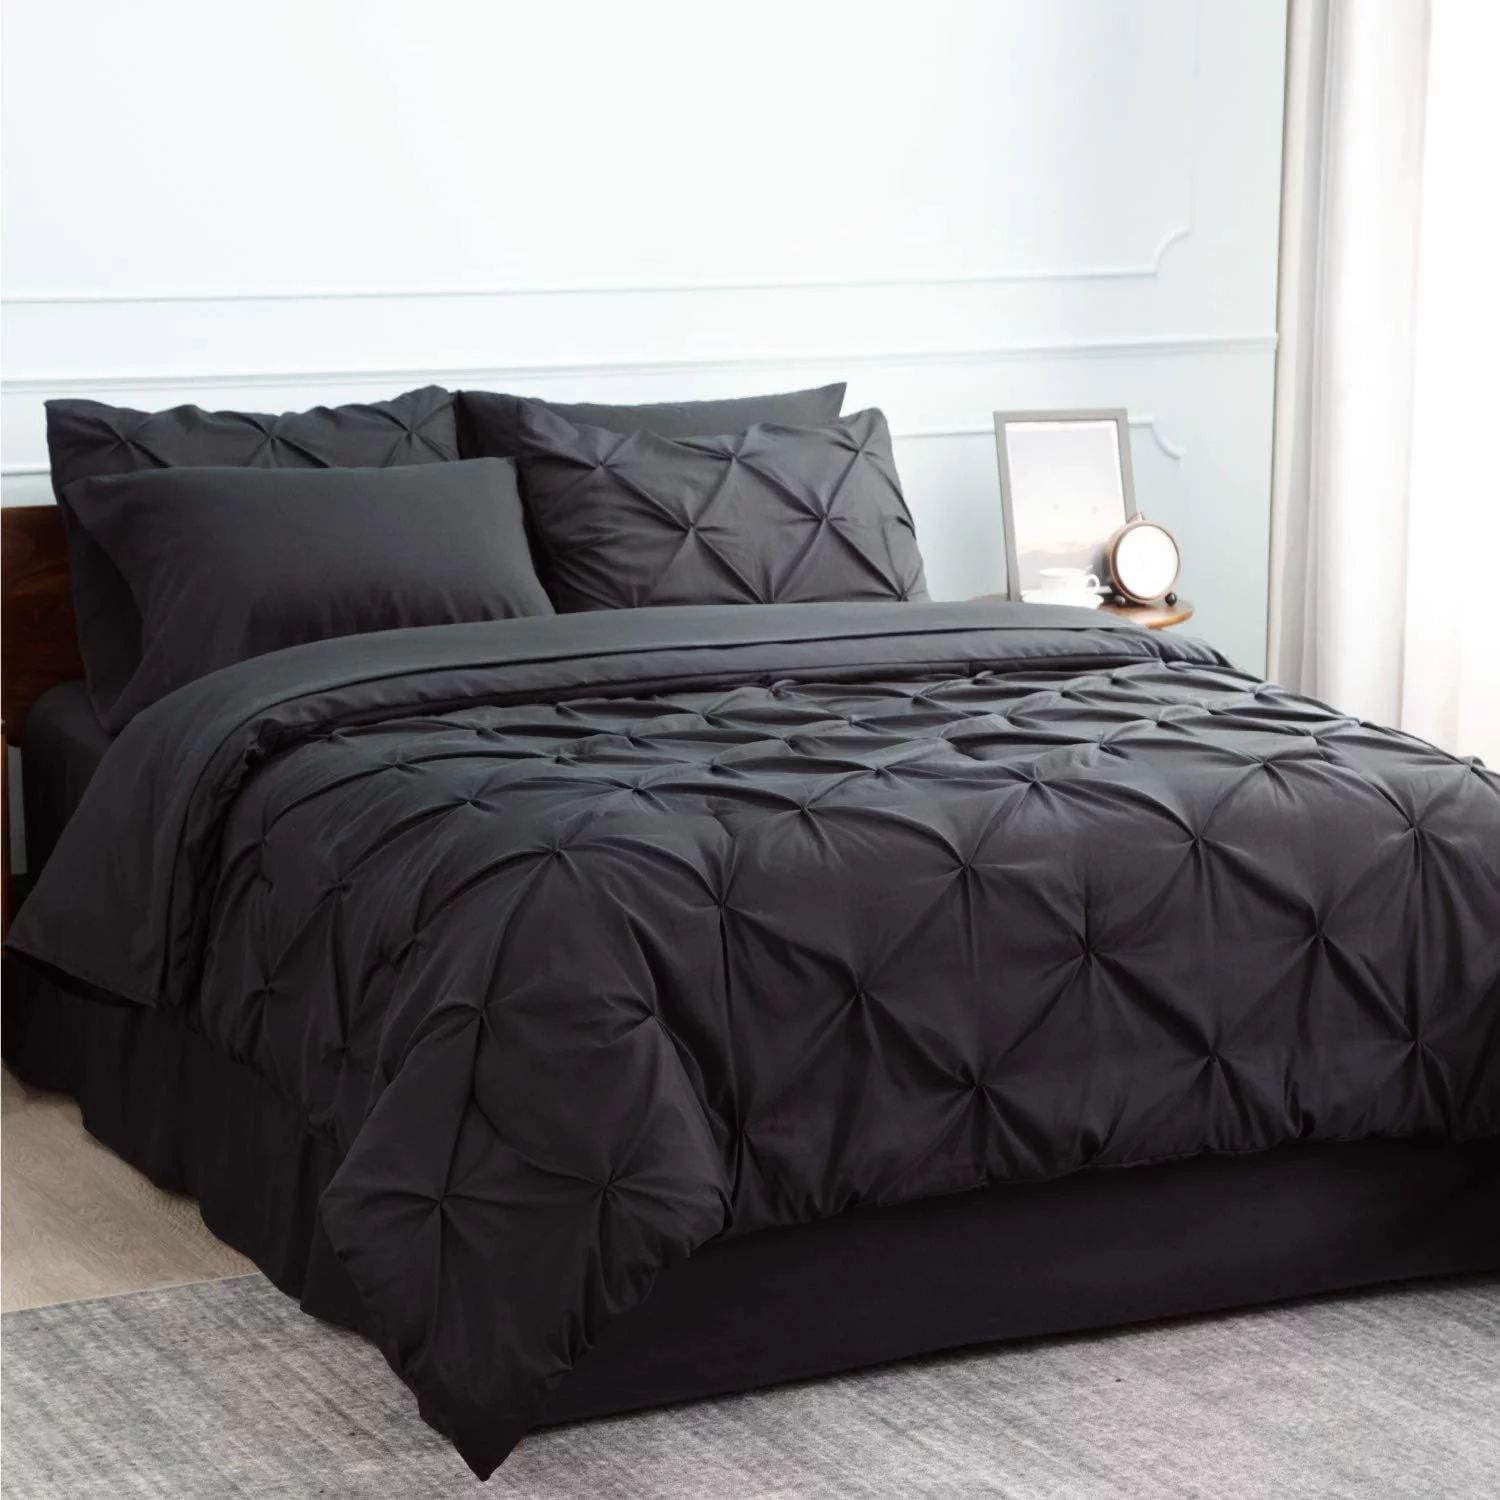 Bedsure Black King Comforter Set - 7 Pieces Pintuck Bedding Sets, Bed in A Bag with Comforters, S... | Walmart (US)